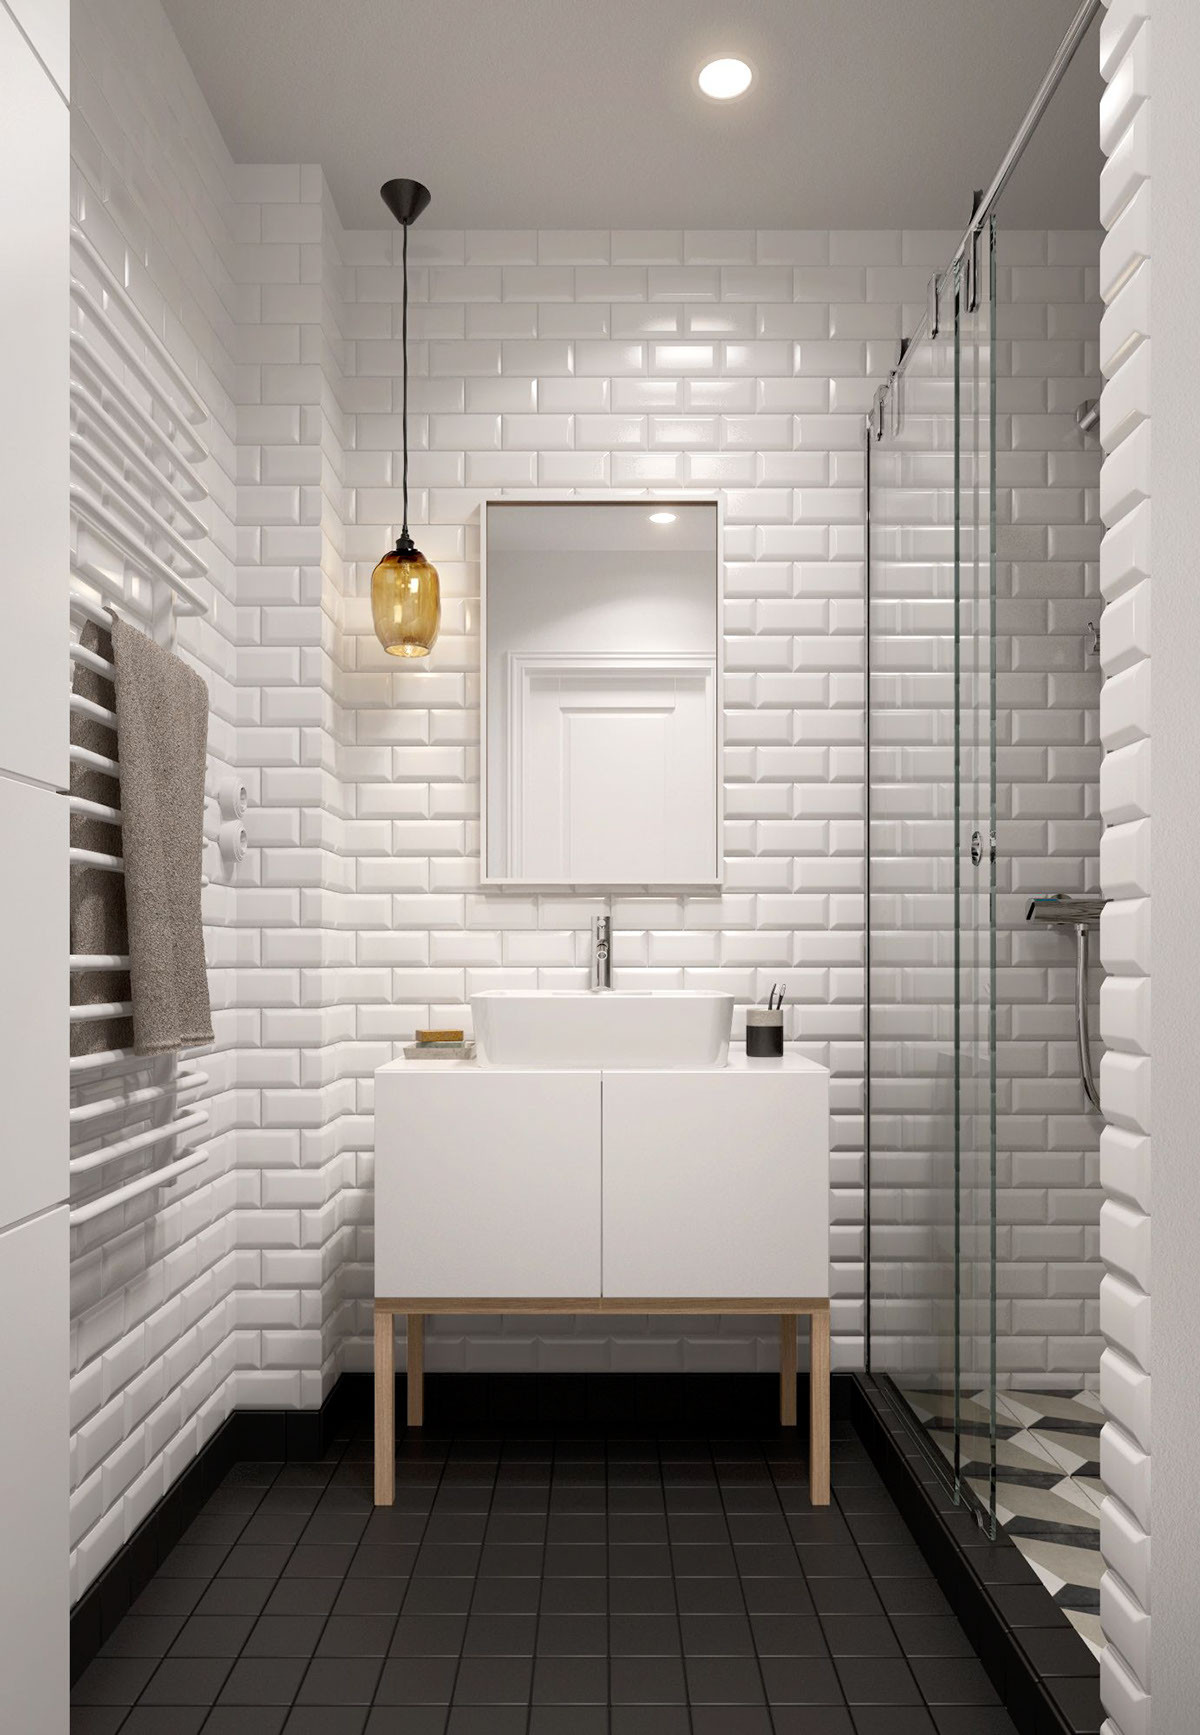 White Bathroom Wall Tiles
 A Midcentury Inspired Apartment with Scandinavian Tendencies